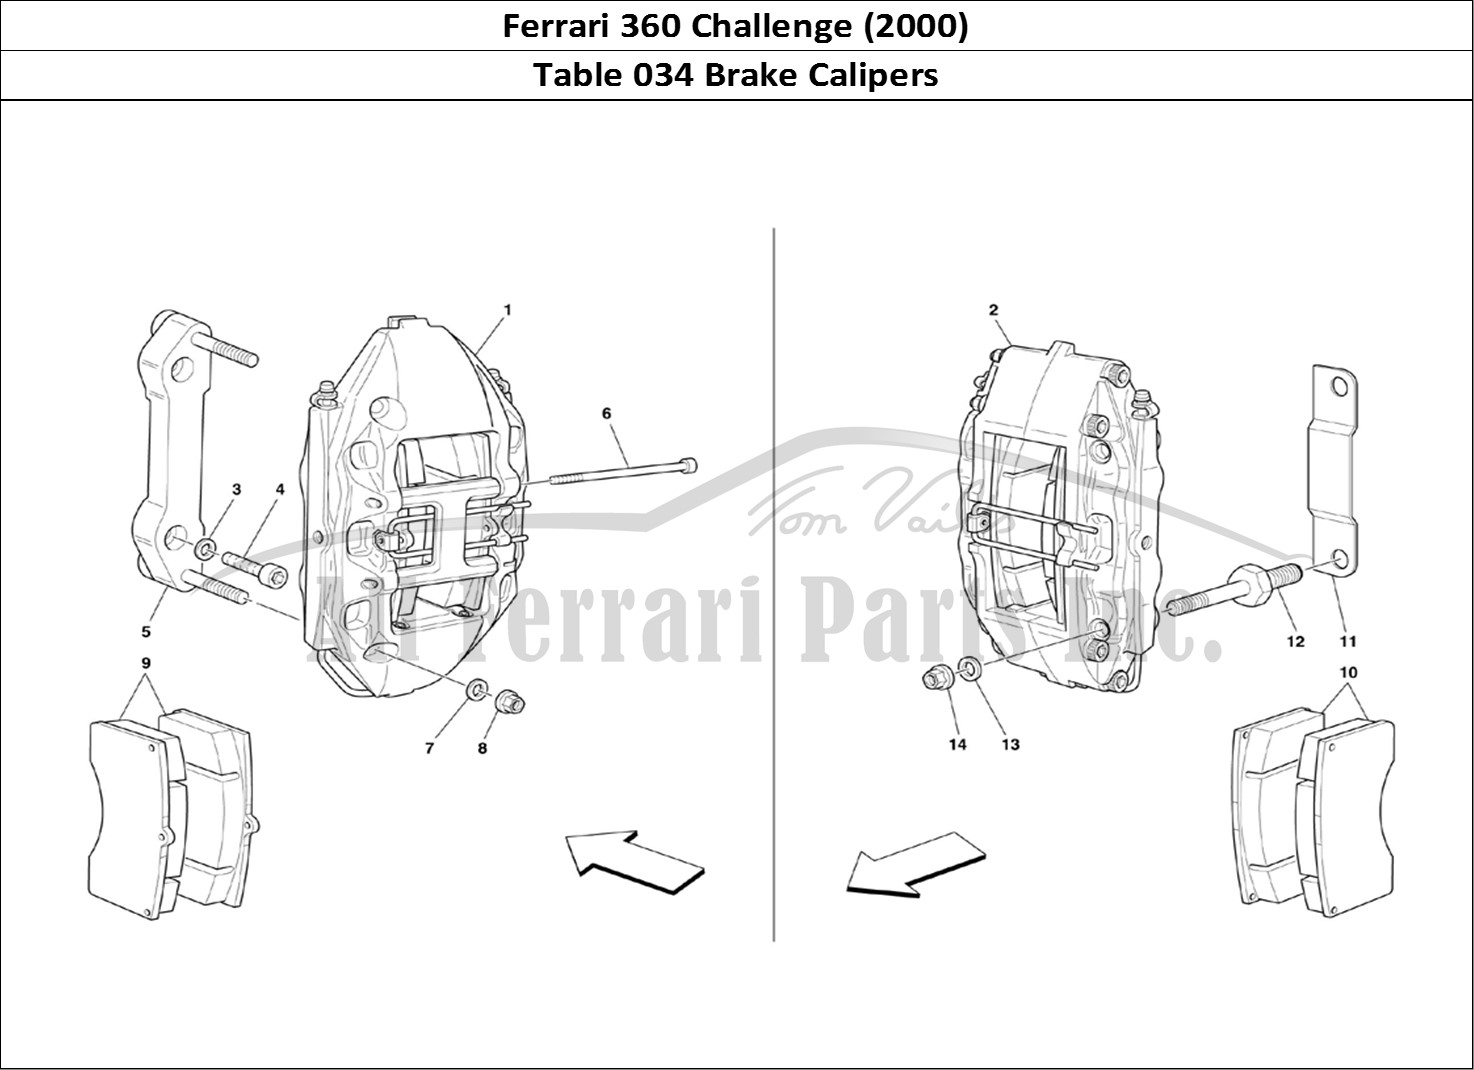 Ferrari Parts Ferrari 360 Challenge (2000) Page 034 Calipers for Front and Re